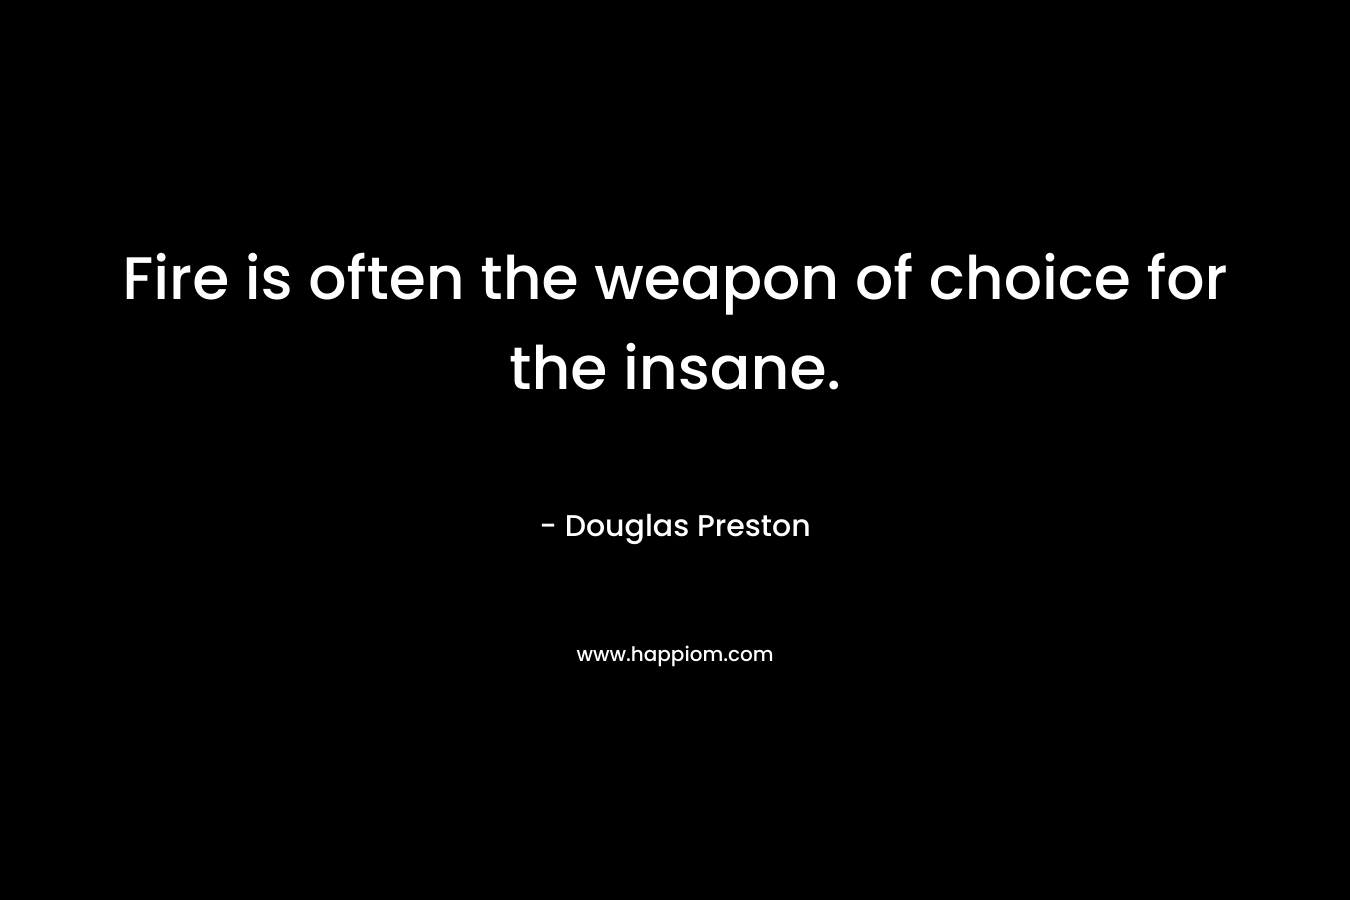 Fire is often the weapon of choice for the insane. – Douglas Preston